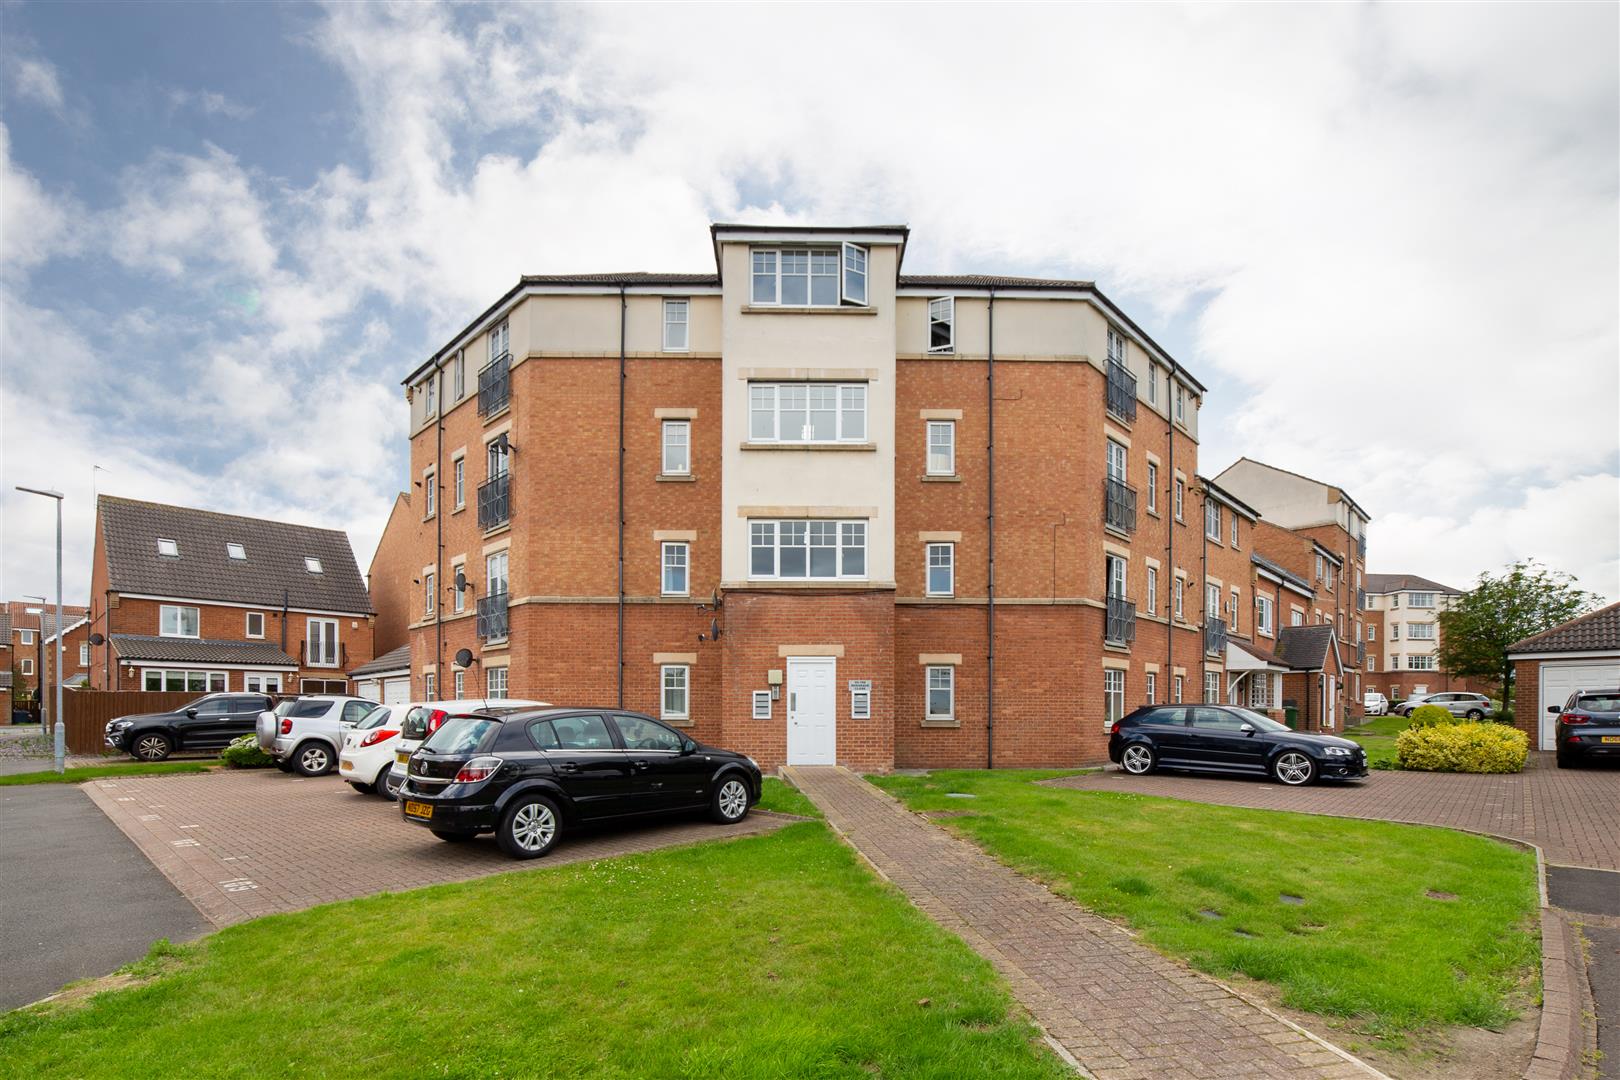 2 bed flat for sale in Redgrave Close, Gateshead - Property Image 1